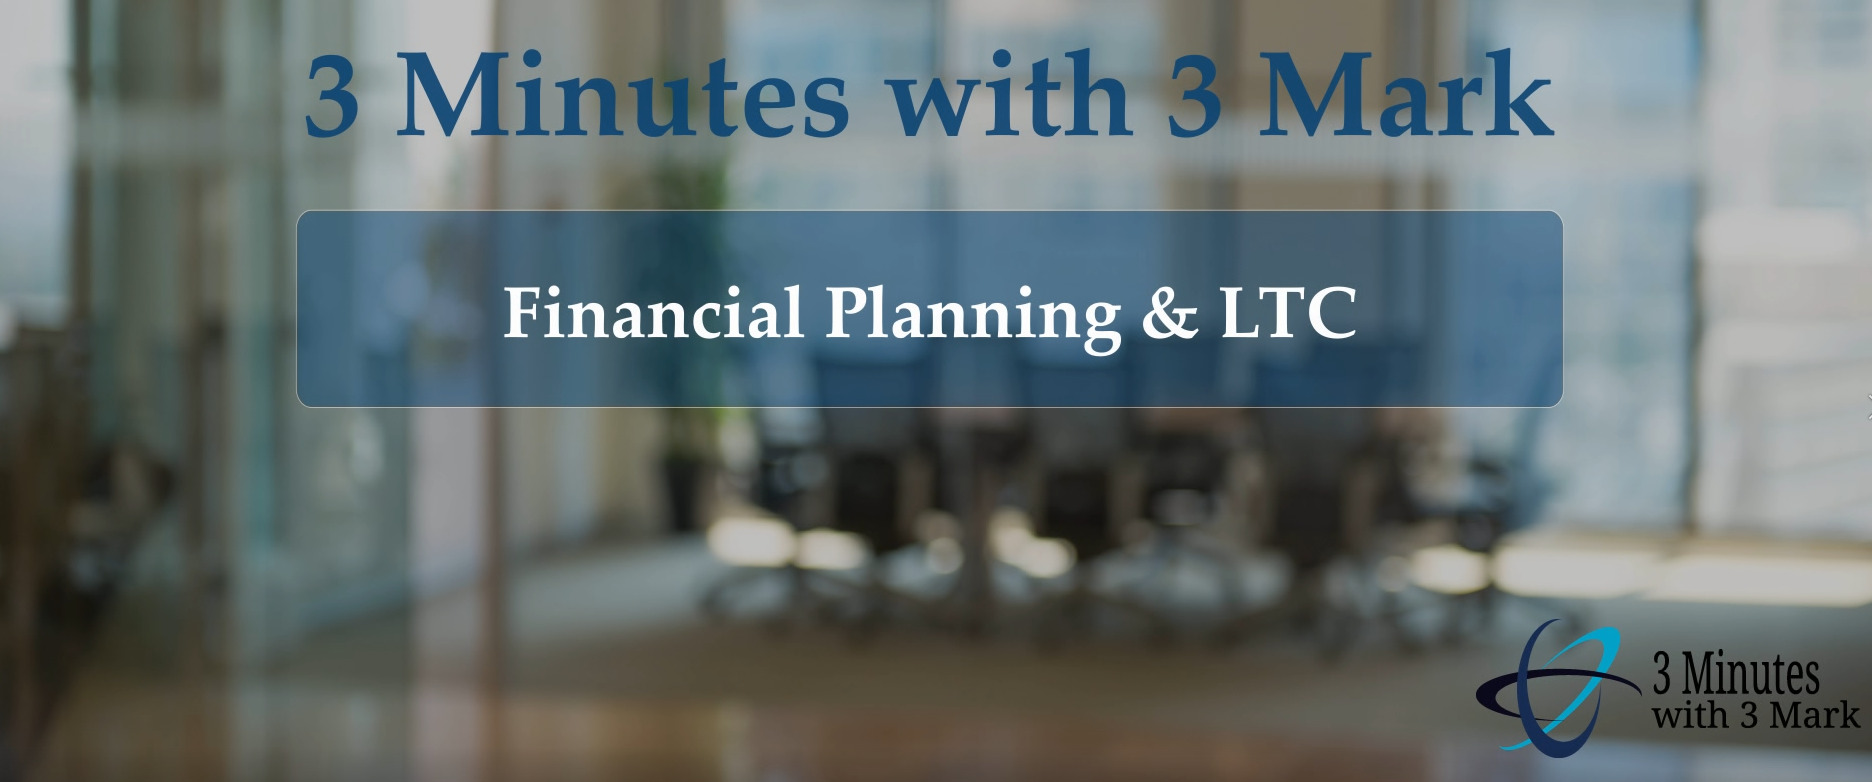 3 Minutes with 3 Mark - Financial Planning & LTC - Scott Meyers - Thumbnail